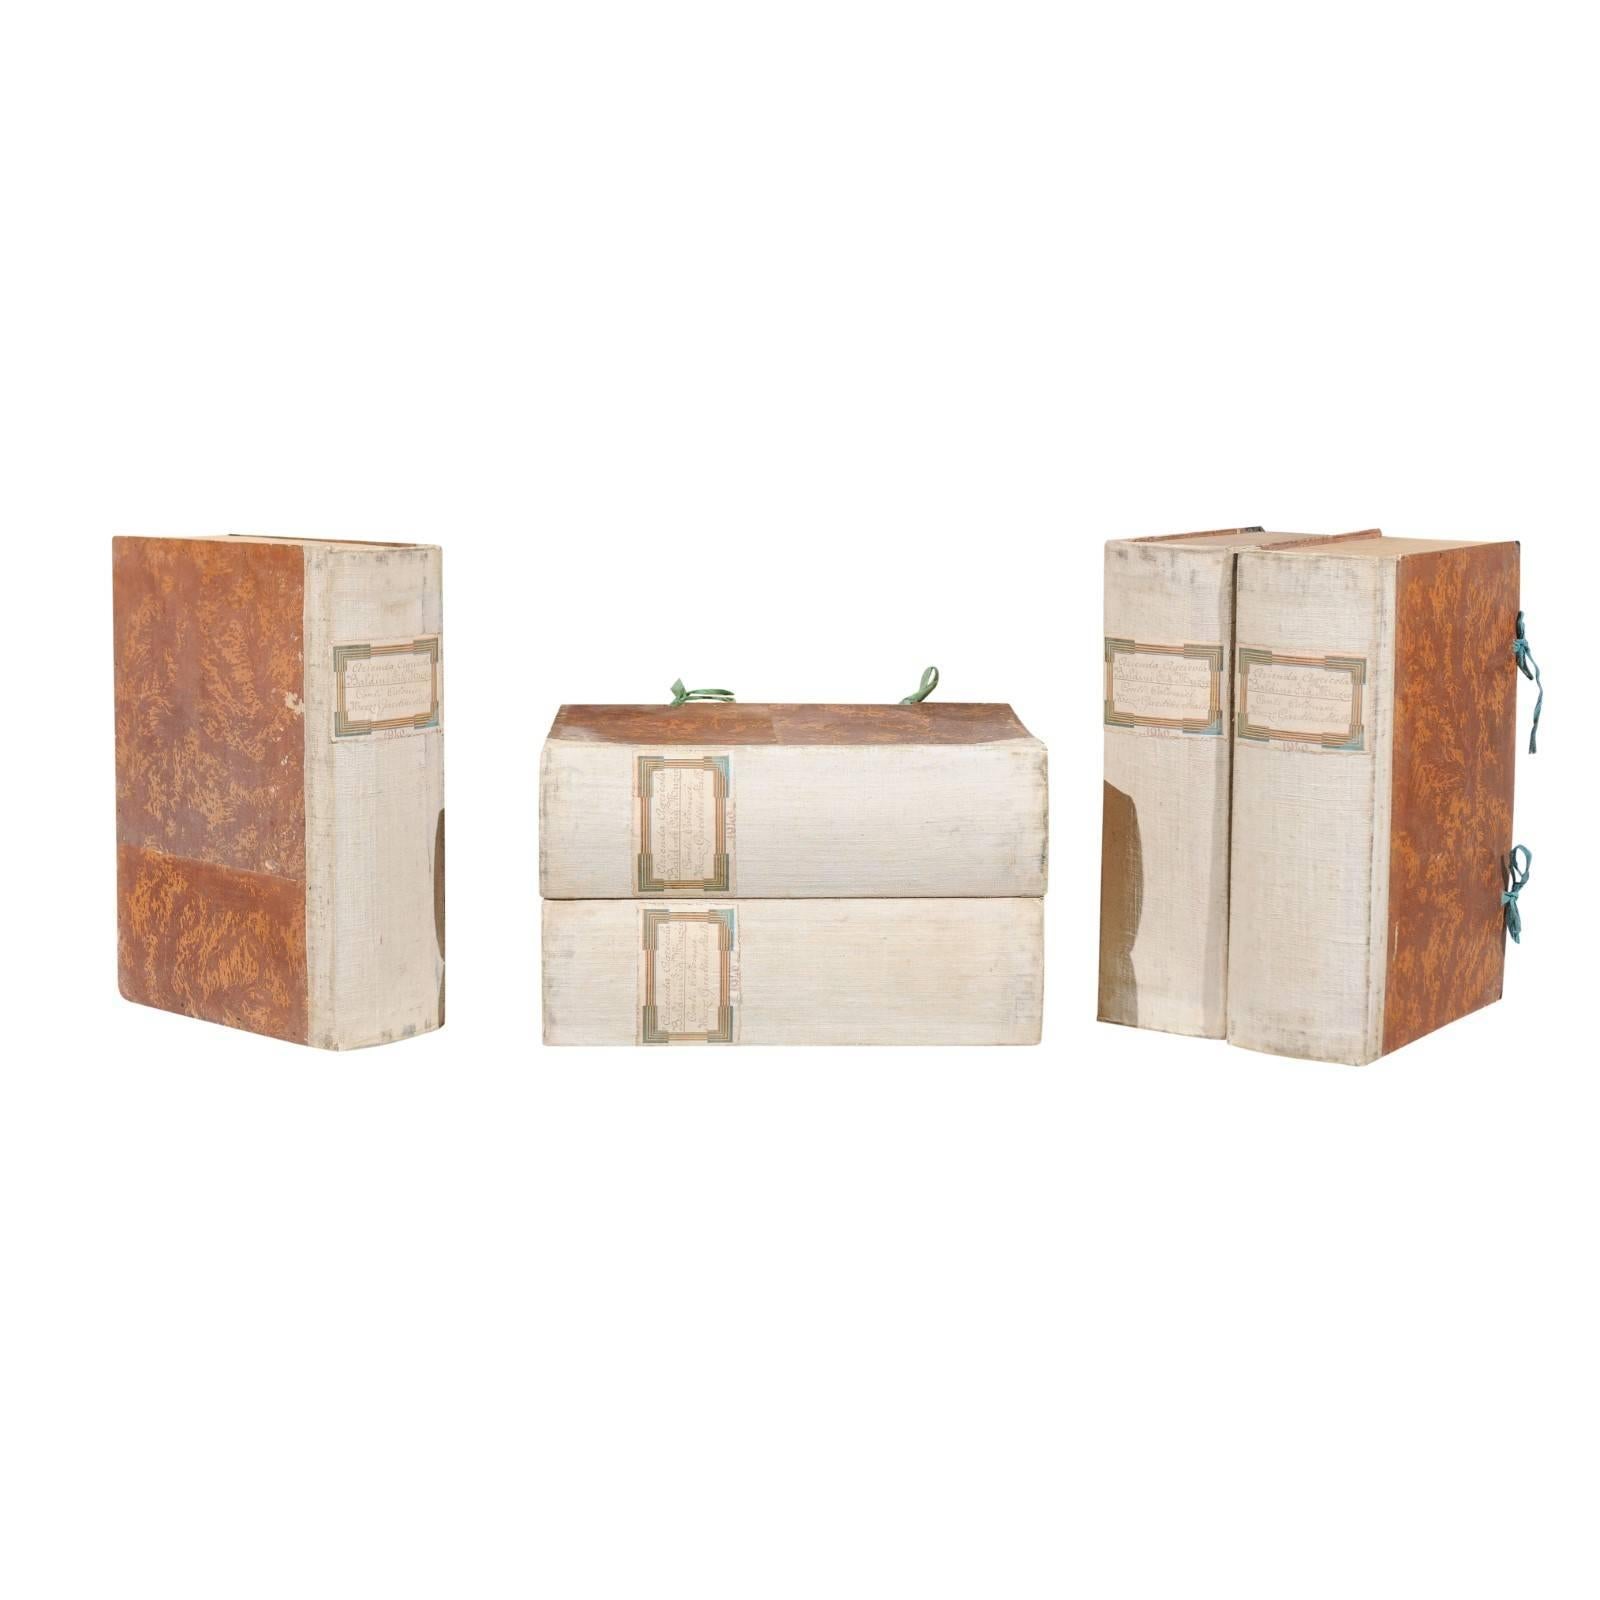 Three Vintage Faux-Book Decorative Boxes from an Italian Winery, circa 1940